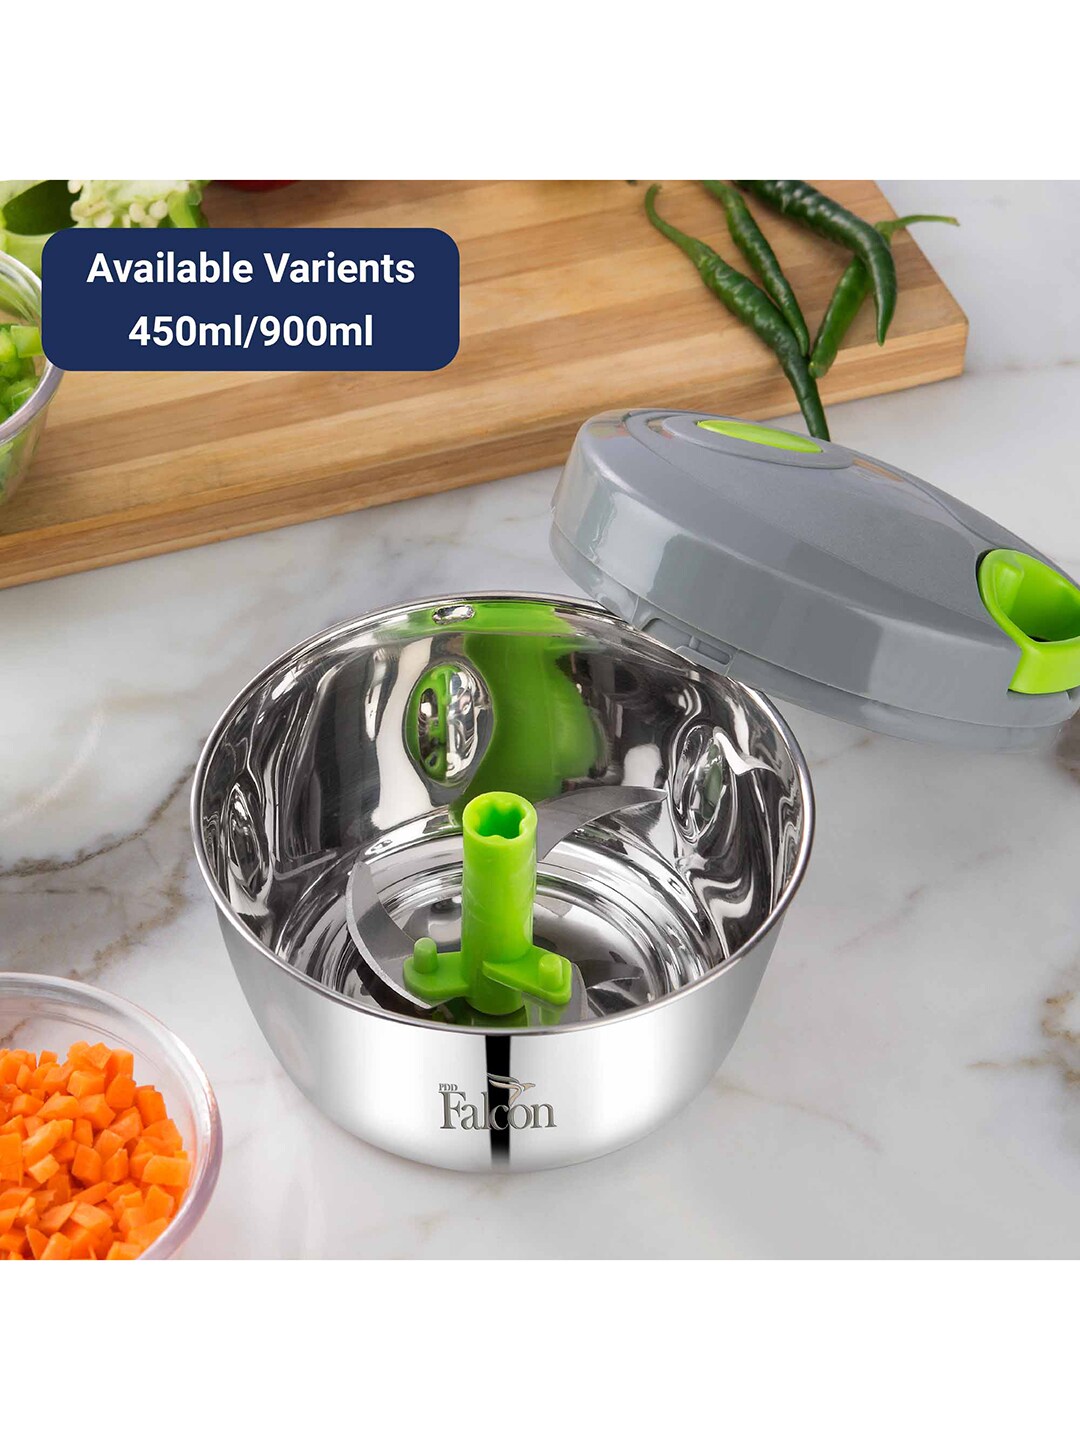 PDDFALCON Adults Silver-Toned & Green Stainless Steel Vegetable Chopper 900ml Price in India